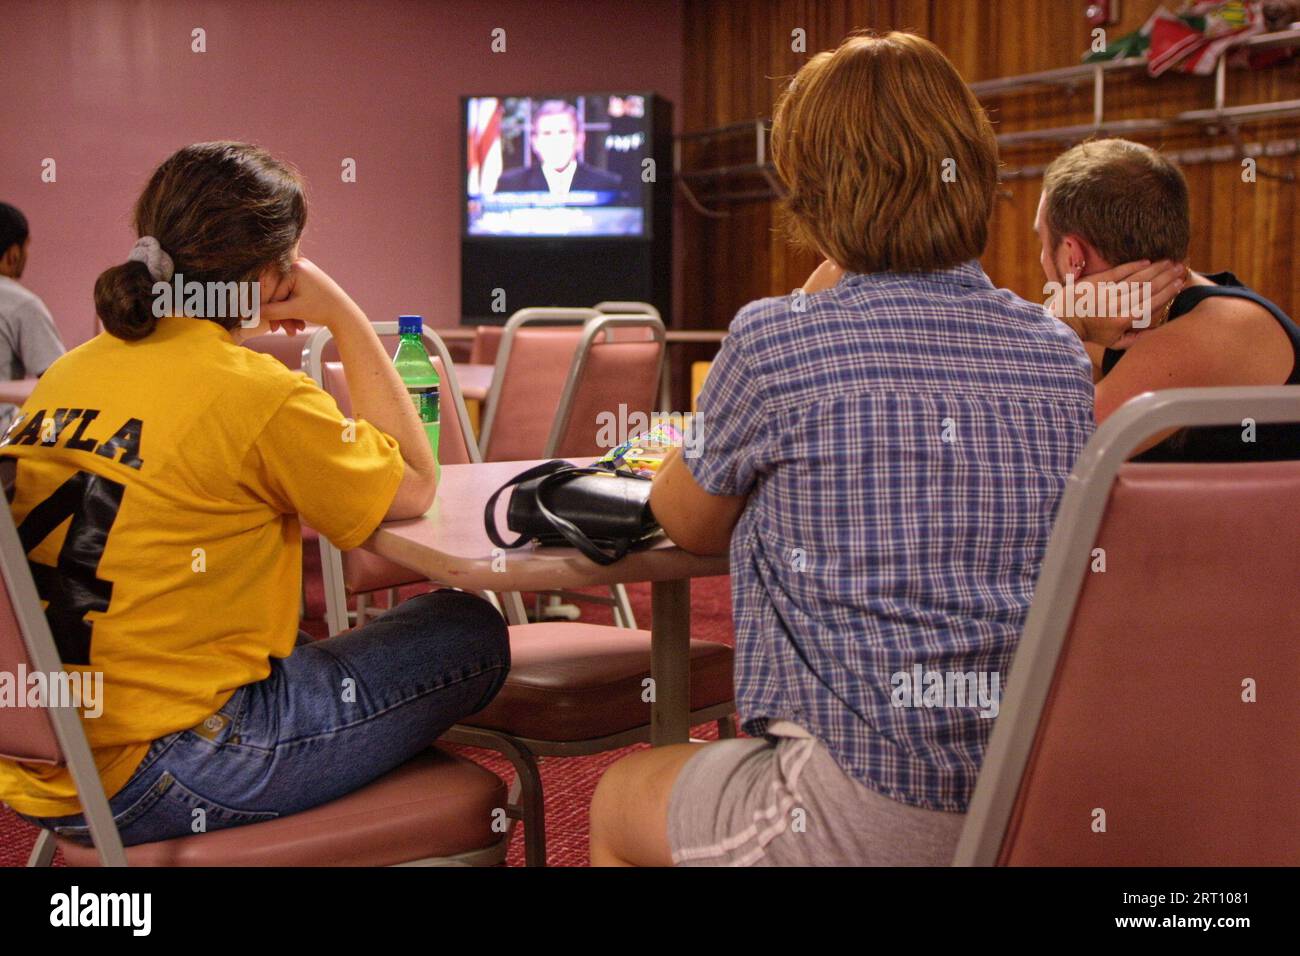 Eastern Kentucky University students (from left) Kayla Stephens of Greenup, Adrienne Keagle of Newport and Paul Shamhart of Lexington watch television as President George W. Bush speaks live from the Oval Office regarding terrorist attacks taking place earlier in the day on Tuesday, Sept. 11, 2001 in Richmond, Madison County, KY, USA. 'Today, our fellow citizens, our way of life, our very freedom, came under attack in a series of deliberate and deadly terrorist acts,' Bush said of the Sept. 11 terrorist attacks in his televised address to the nation. (Apex MediaWire Photo by Billy Suratt) Stock Photo